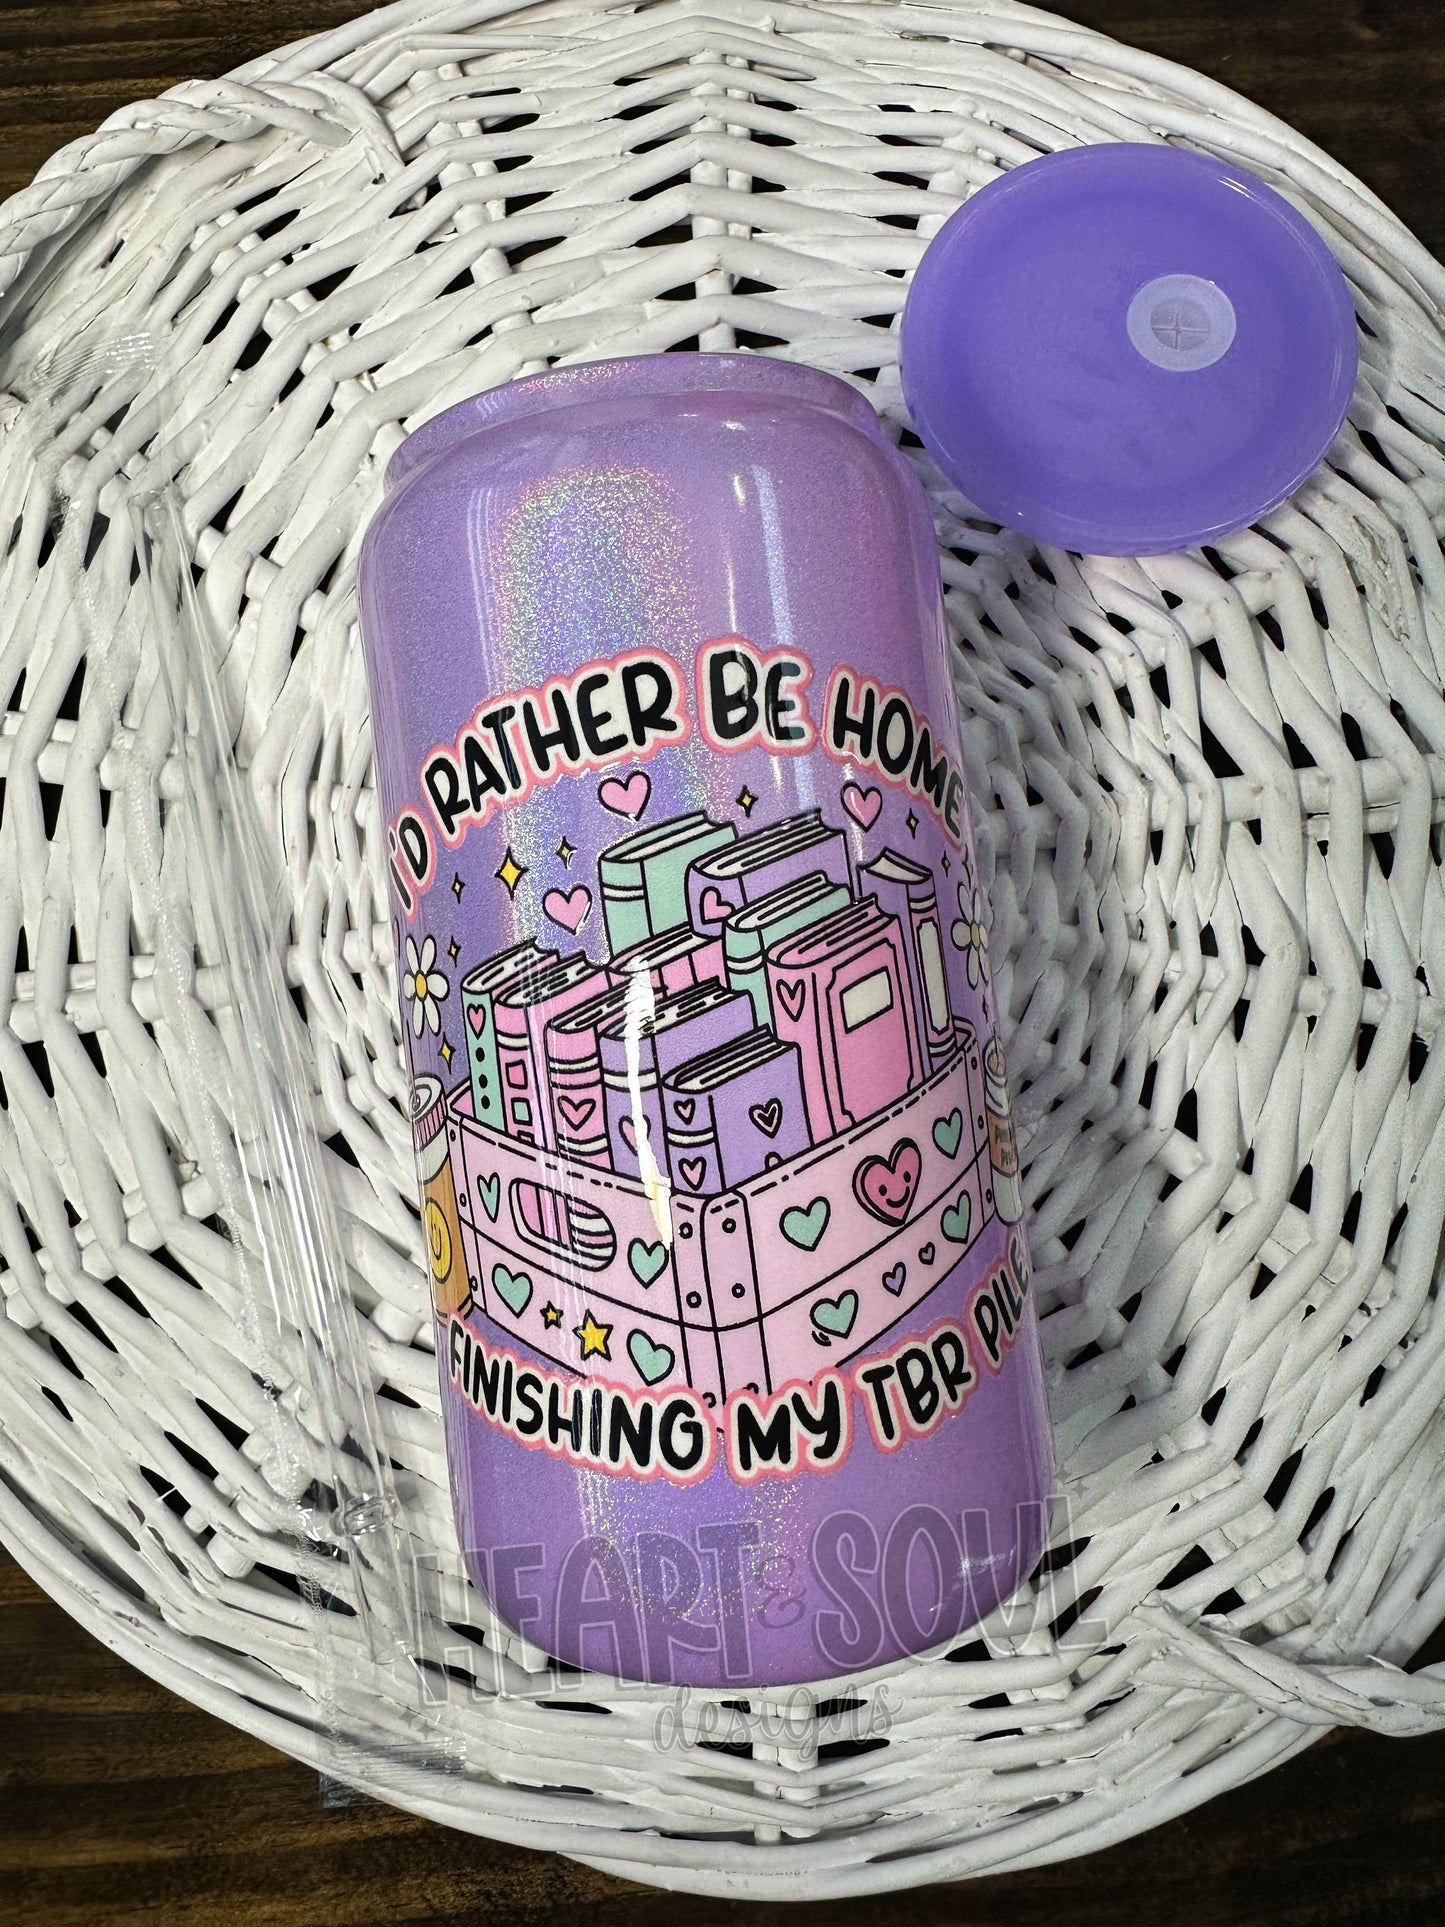 Rather be home reading my tbr pile - shimmer glass cup/purple